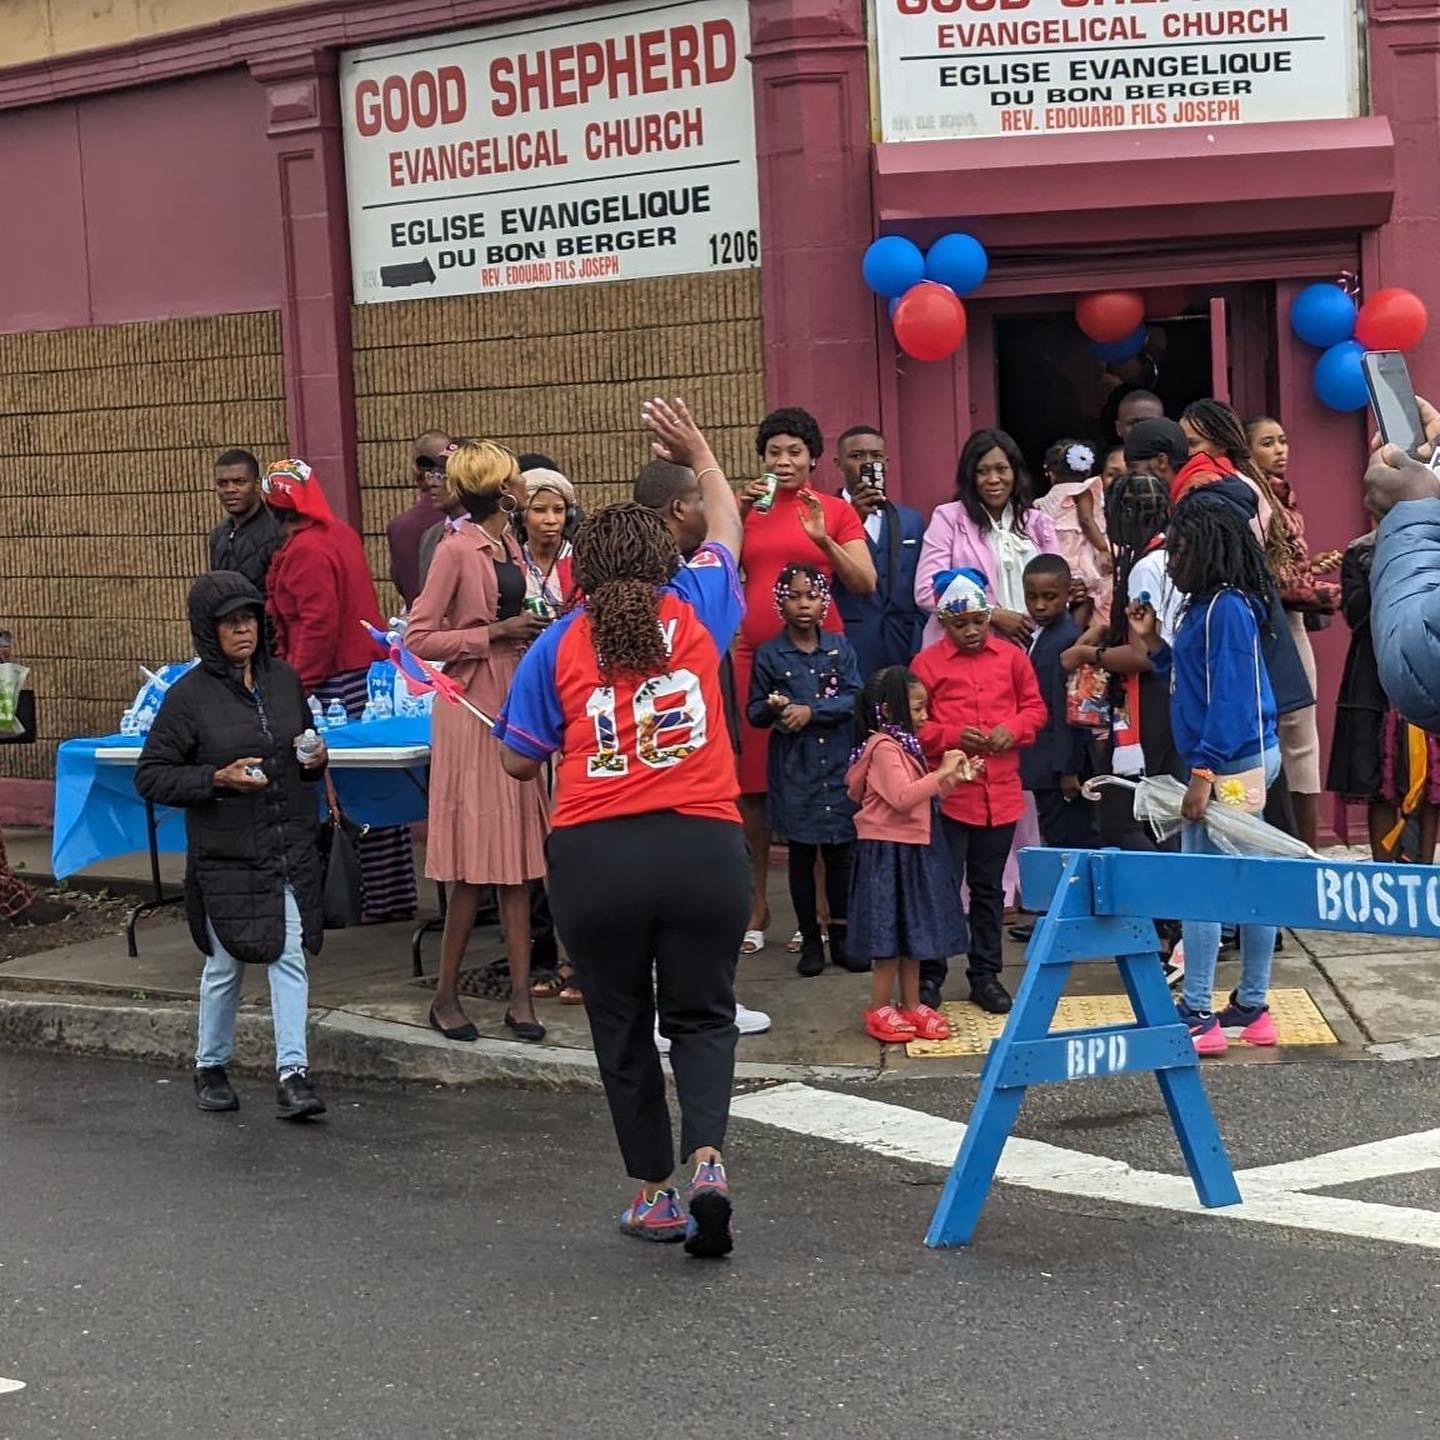 Not even ☔️ can rain on our parade! Scenes from the 🇭🇹 parade route from #Mattapan to #Dorchester 

Thank you to HAU for organizing and to @sparkfmonline for again providing us with a soundtrack &amp; celebrating with us!